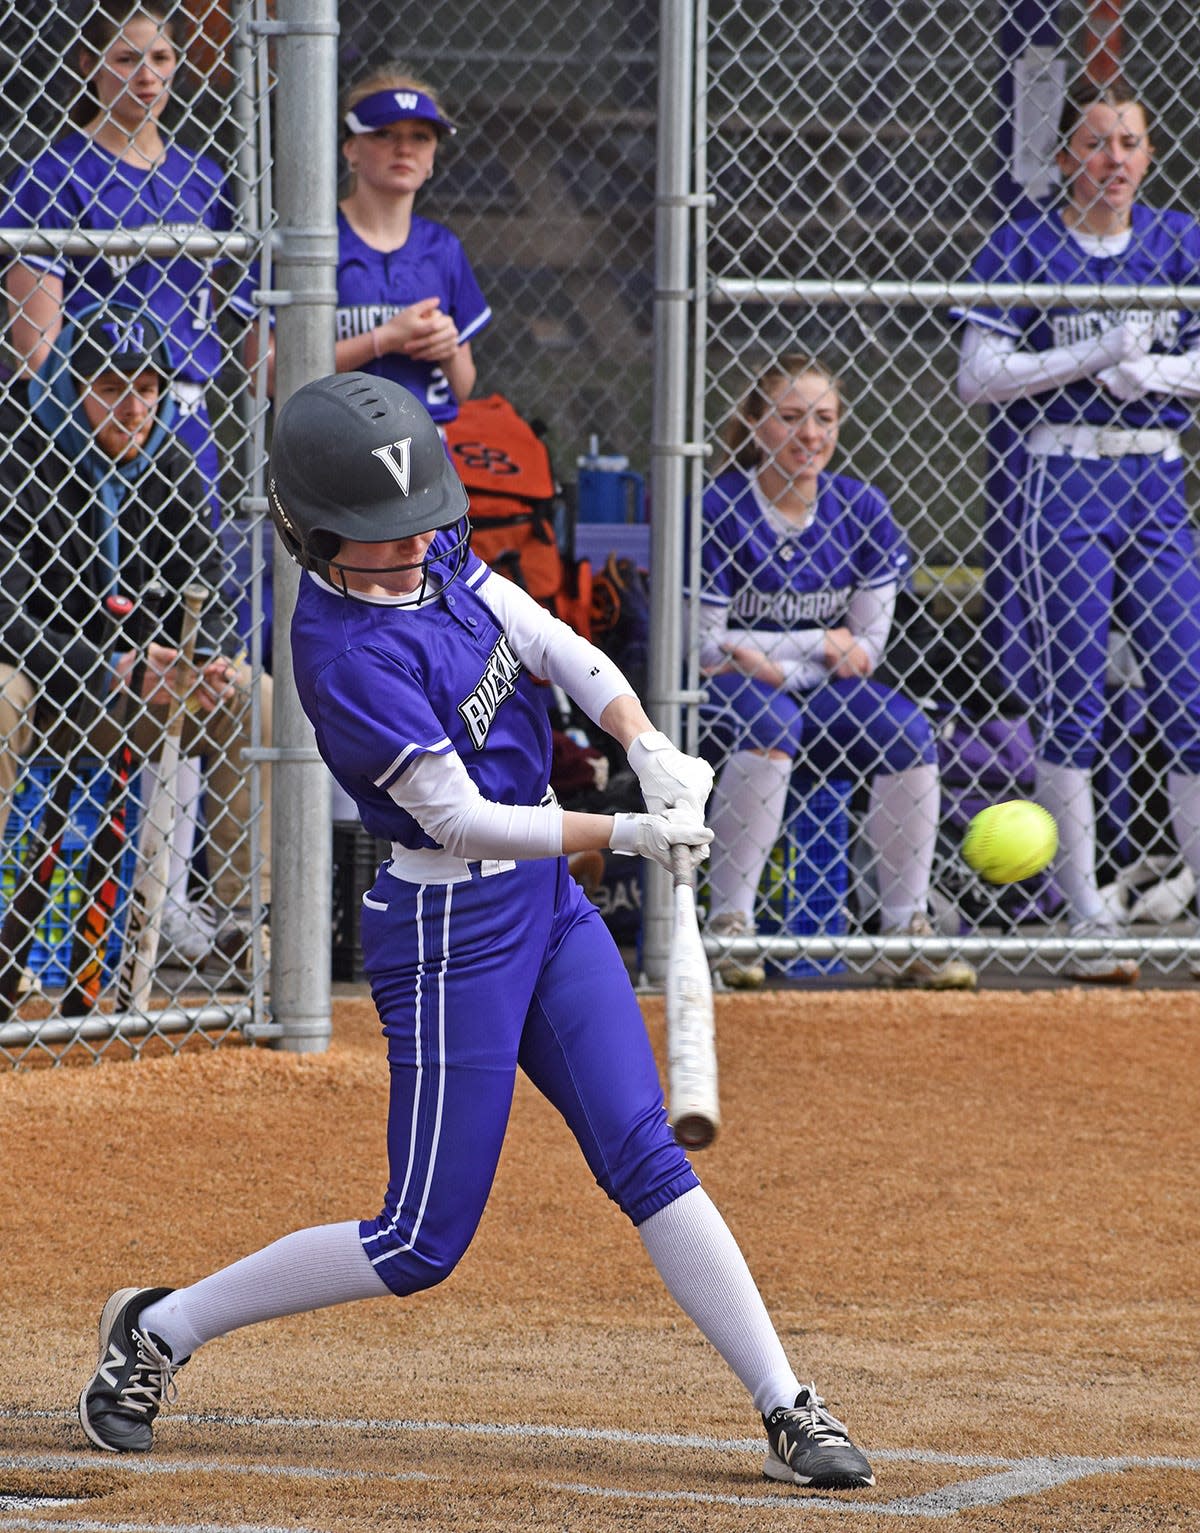 Emily Sterner of Wallenpaupack Area pounces on a pitch against West Scranton and lines it up the middle for a basehit.